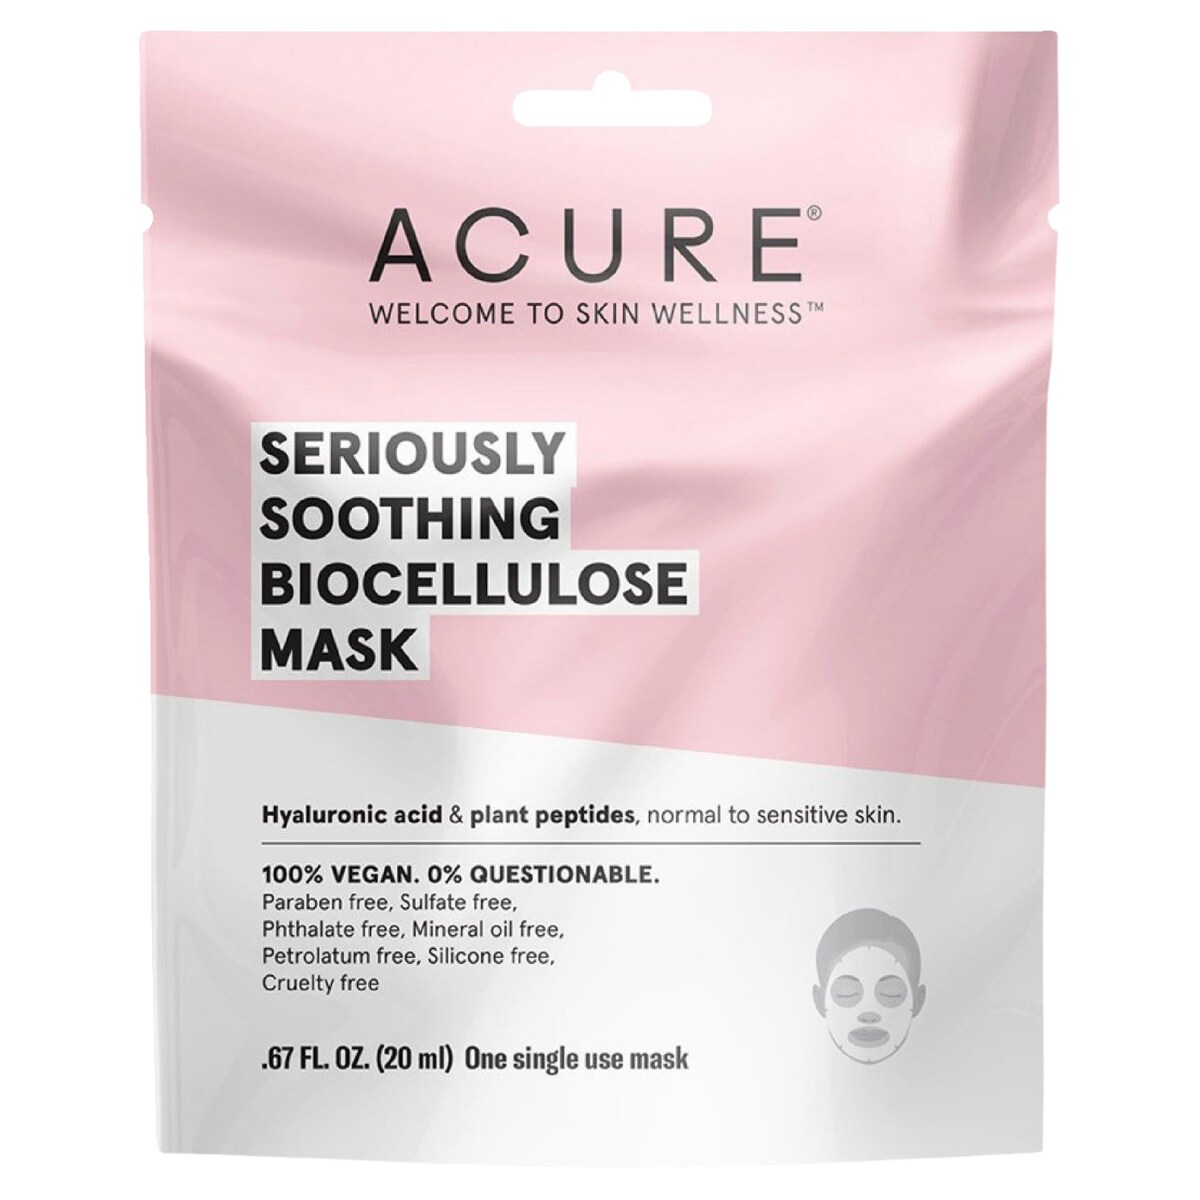 Acure Seriously Soothing Biocellulose Mask 20Ml